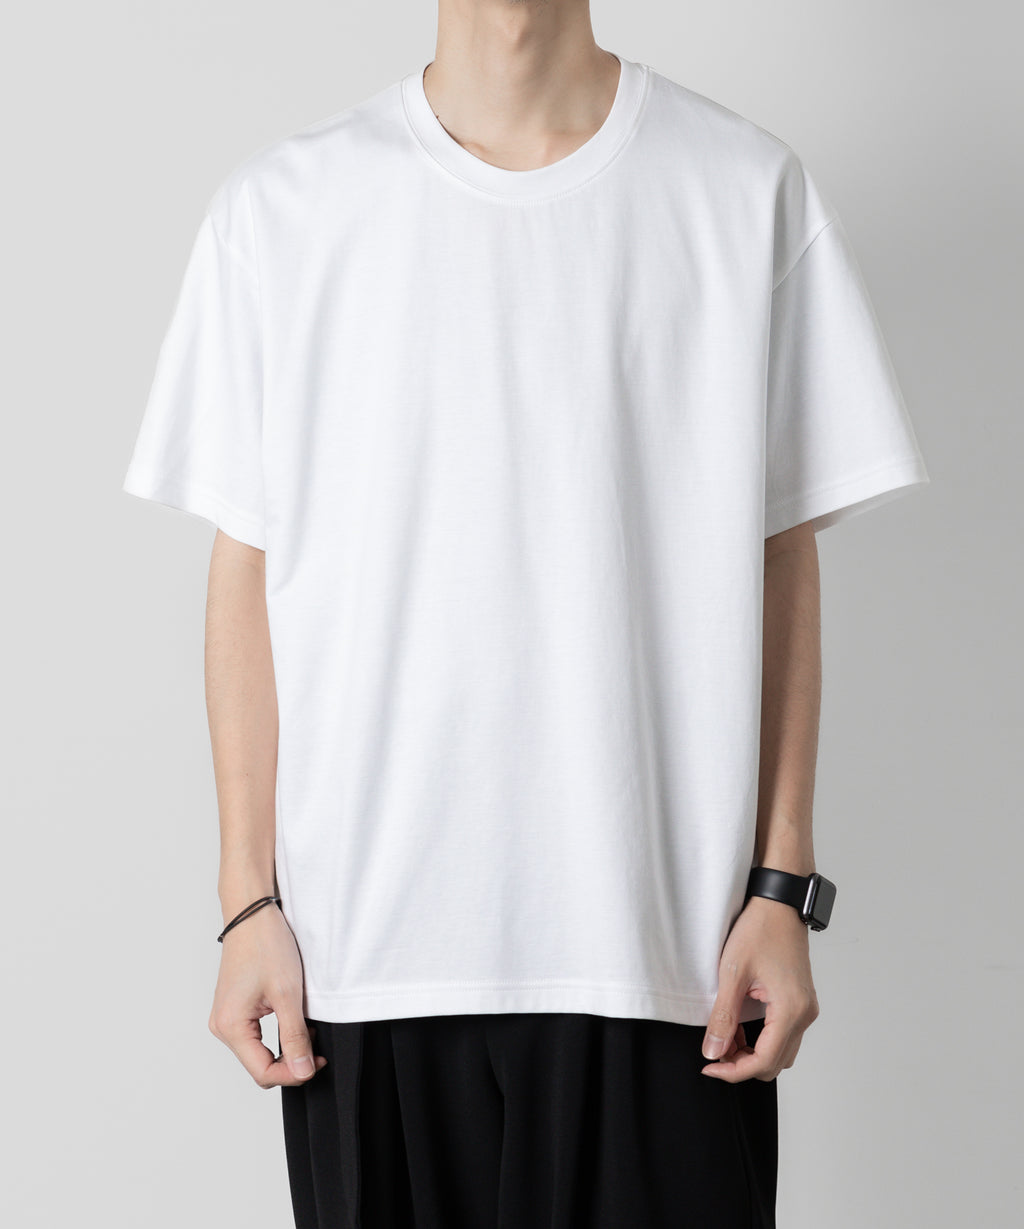 【ATTACHMENT】ATTACHMENT アタッチメントのCOTTON DOUBLE FACE OVERSIZED S/S TEE - WHITE 公式通販サイトsession福岡セレクトショップ